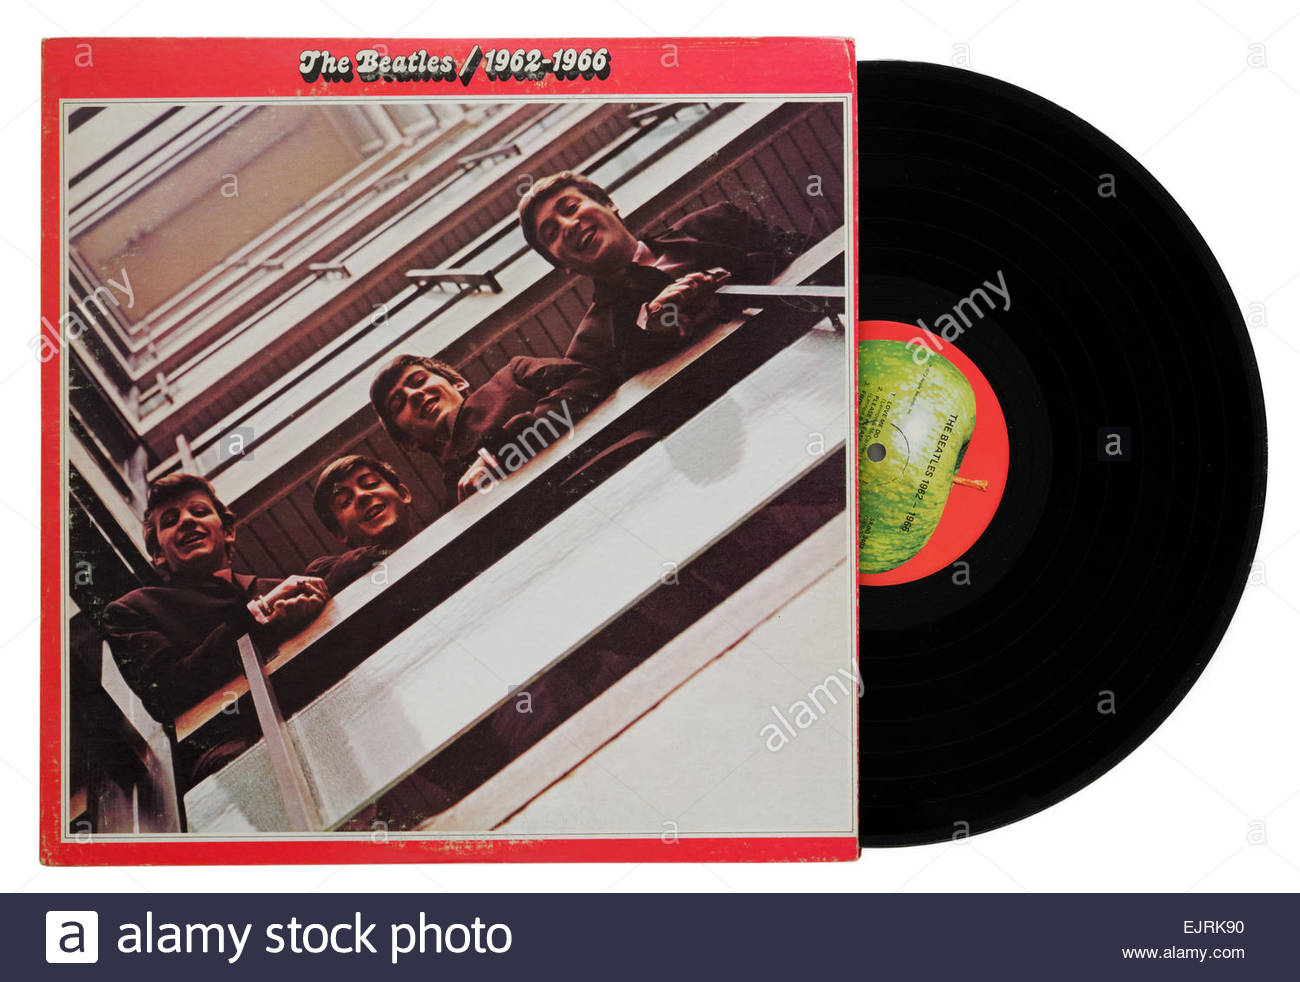 The Beatles 1966 Stock Photos & The Beatles 1966 Stock Images - Alamy